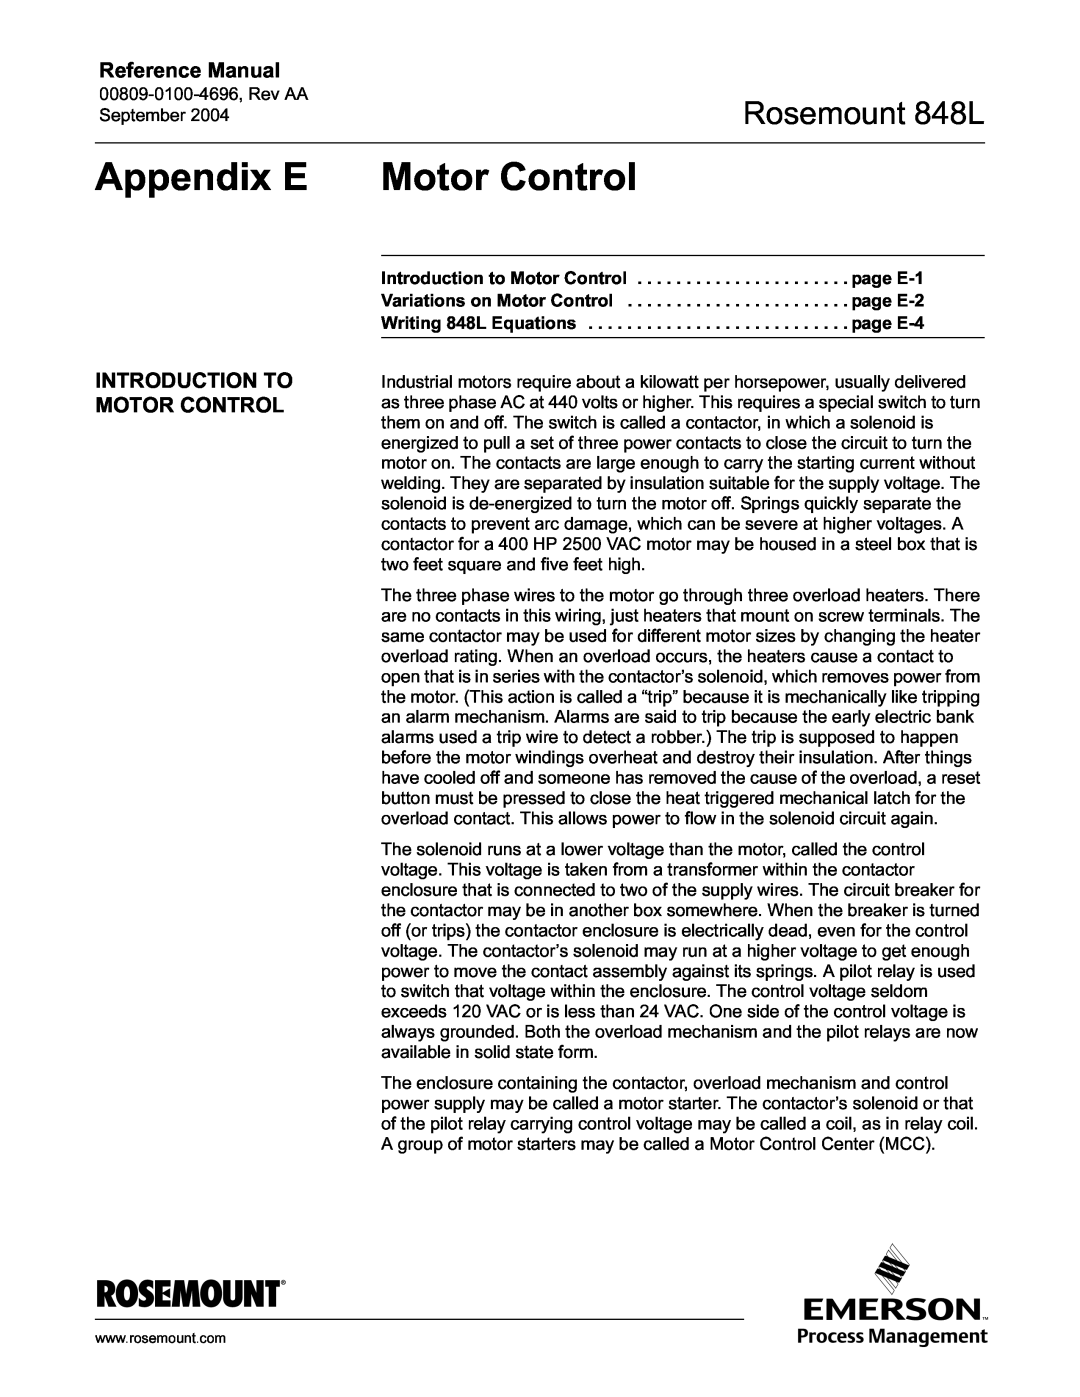 Emerson manual Appendix E, Introduction To Motor Control, Rosemount 848L, Reference Manual 